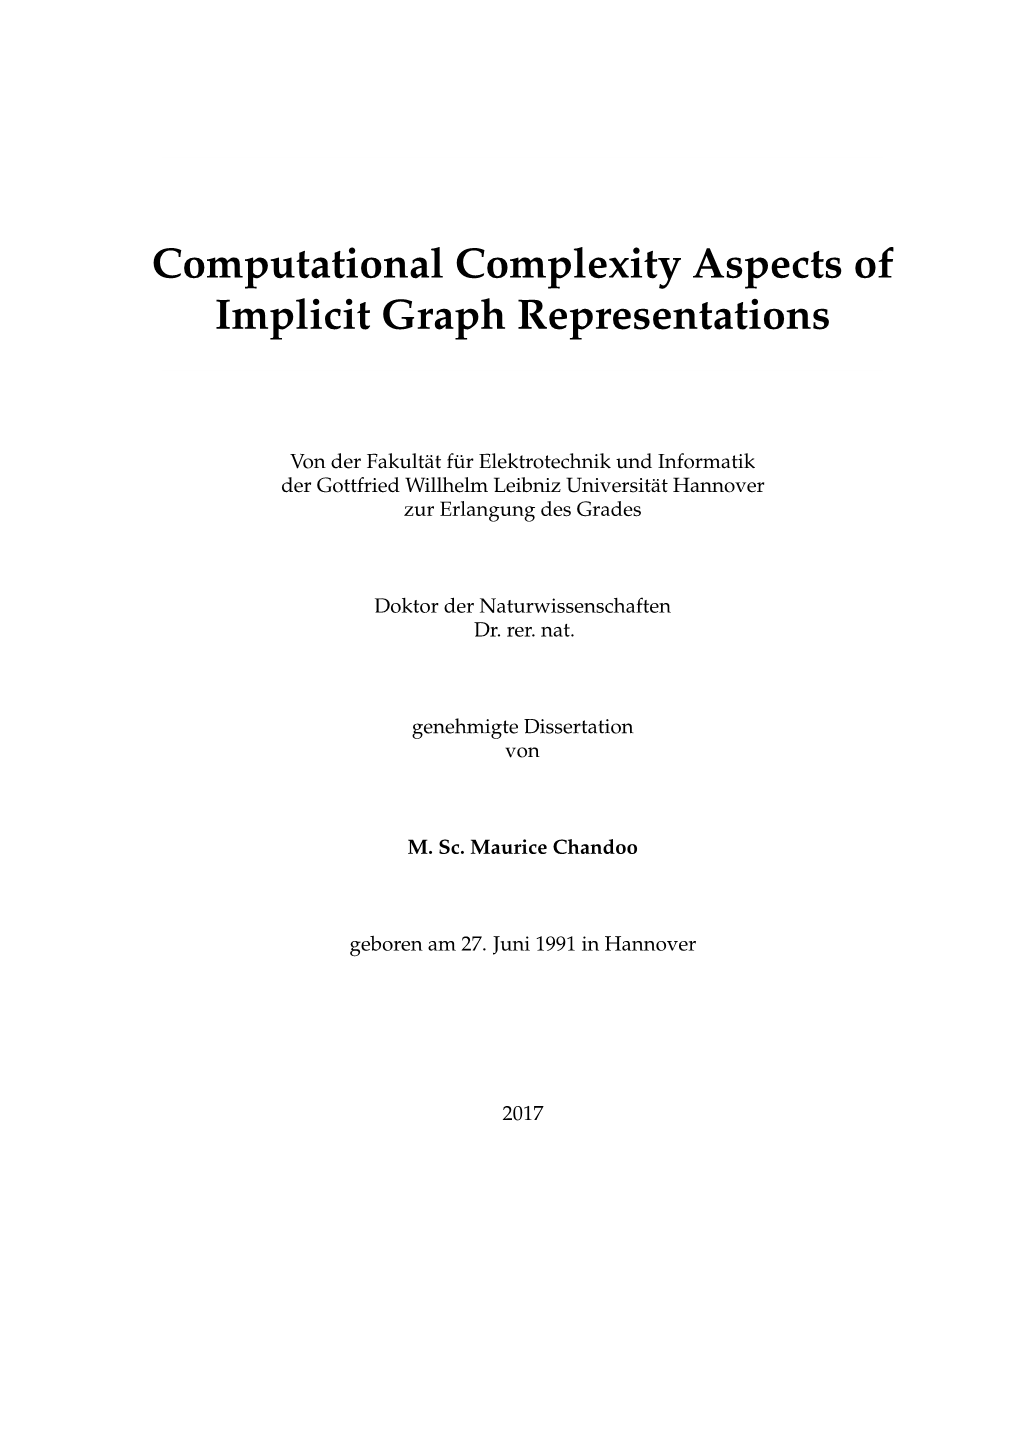 Computational Complexity Aspects of Implicit Graph Representations